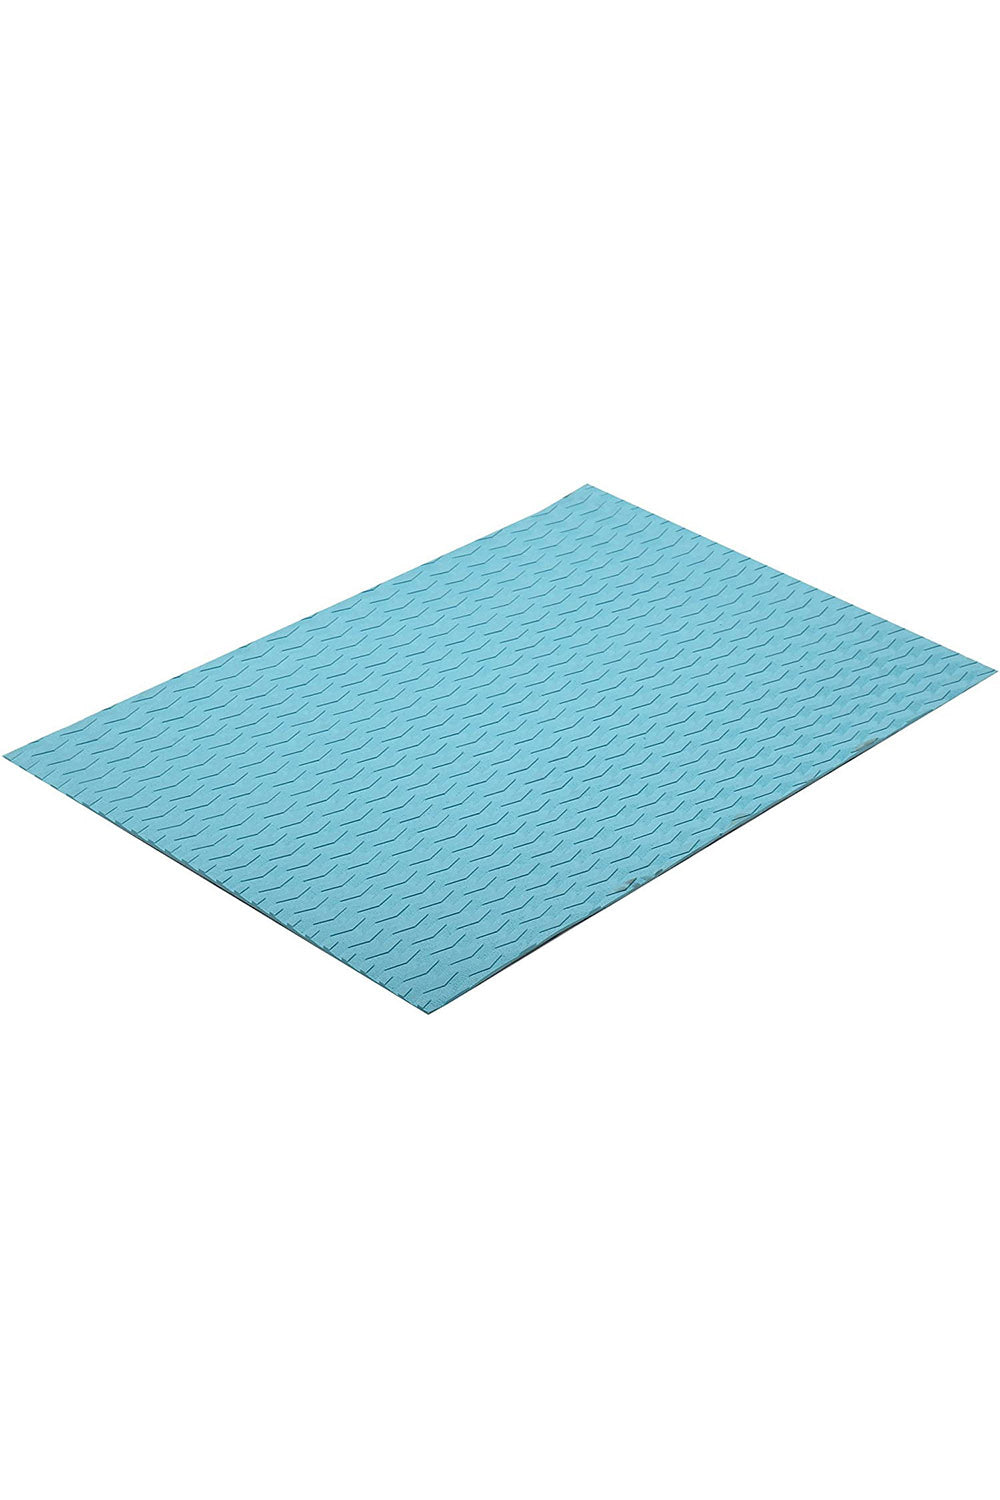 HXBYX Non-Slip Deck Pad Grip Mat Traction Mat, Trimmable DIY EVA